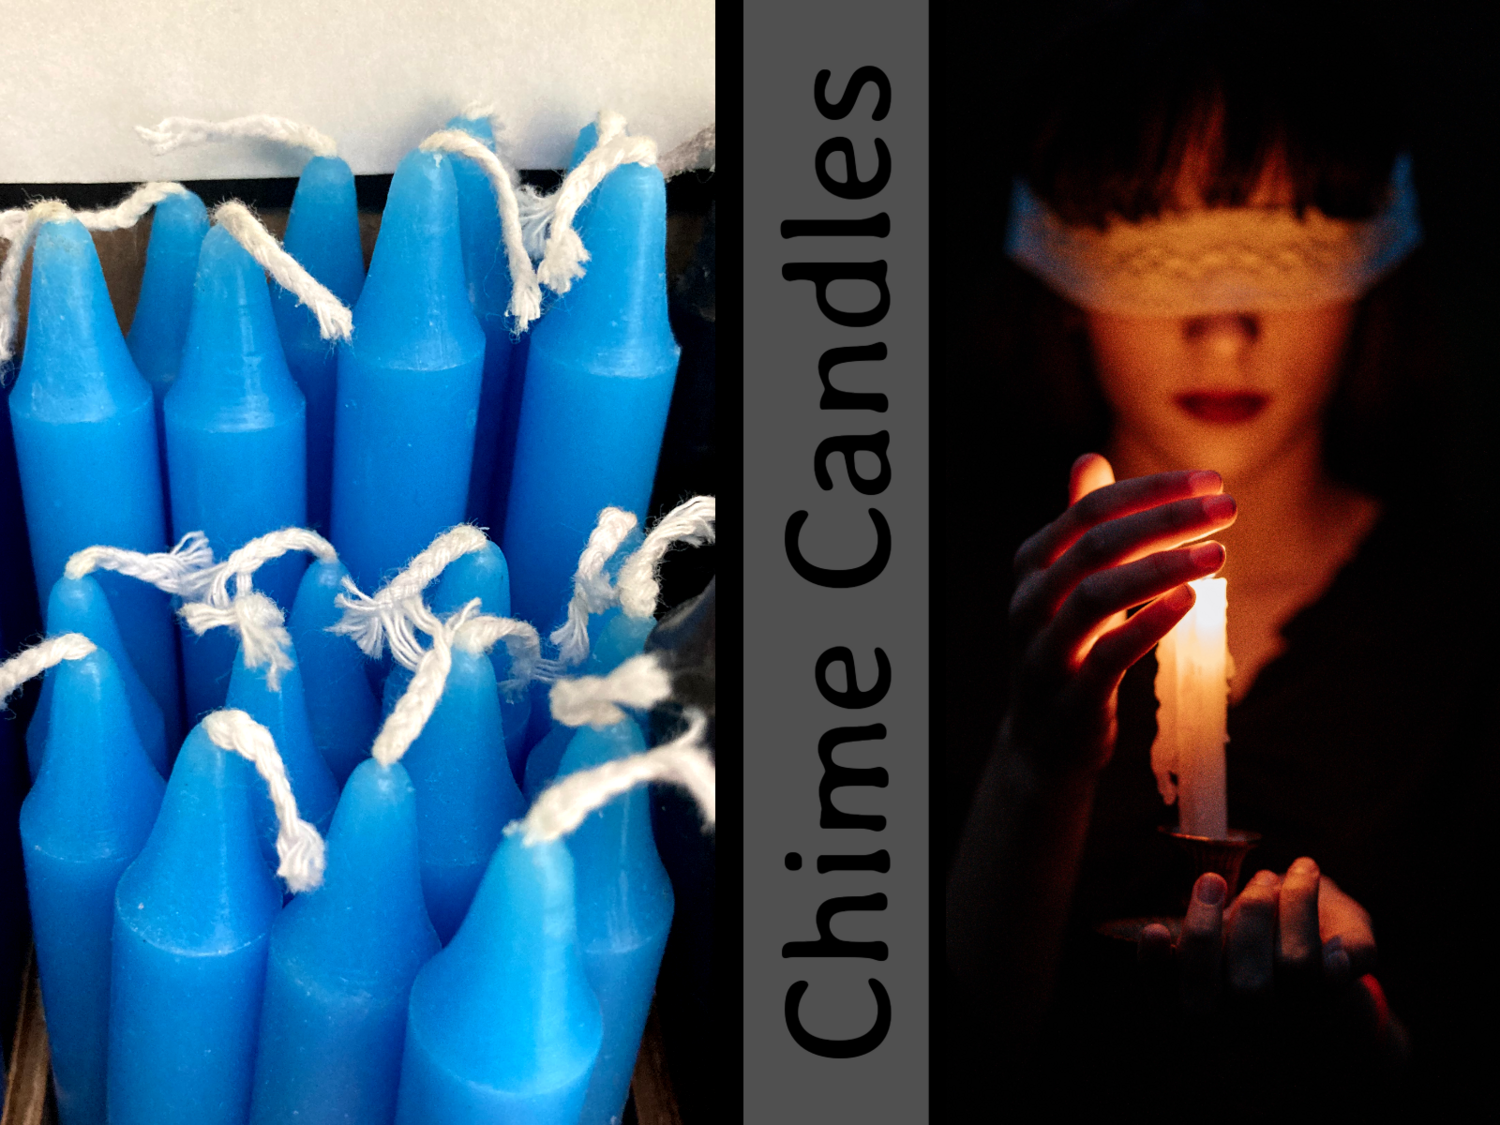 5” Light Blue Chime Candles - 